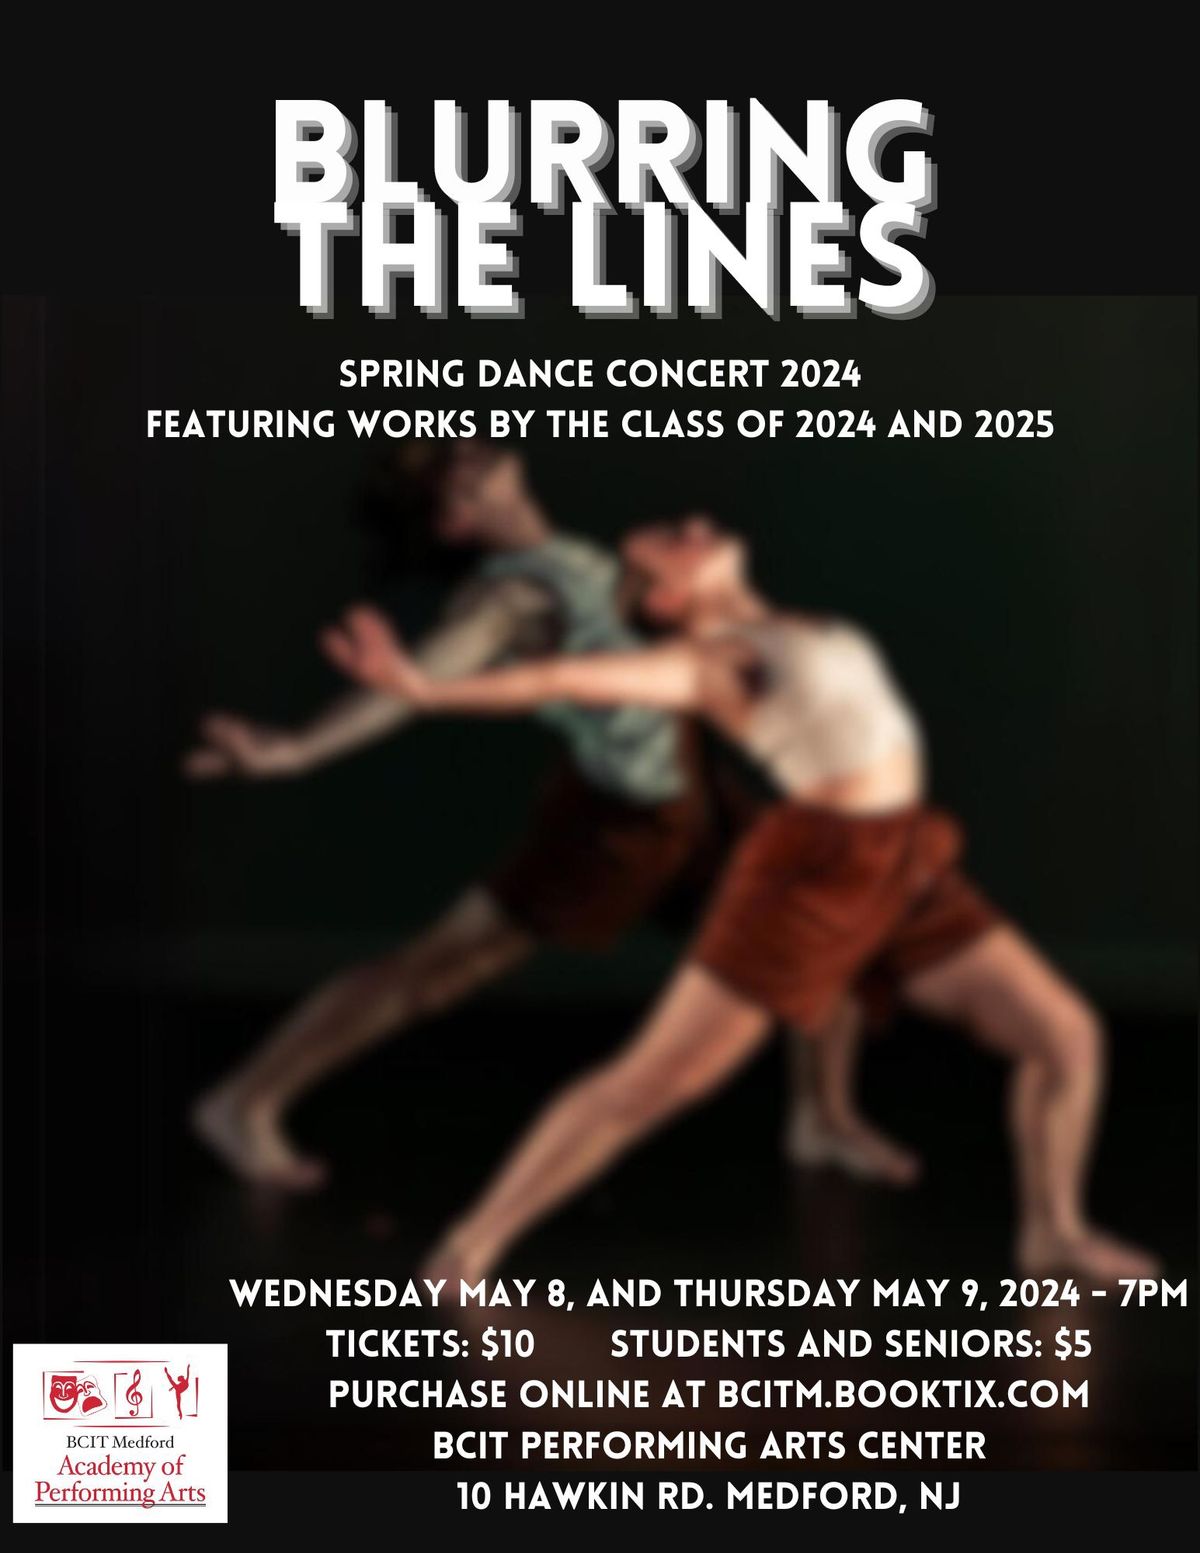 Blurring the Lines - Spring Dance Concert 2024